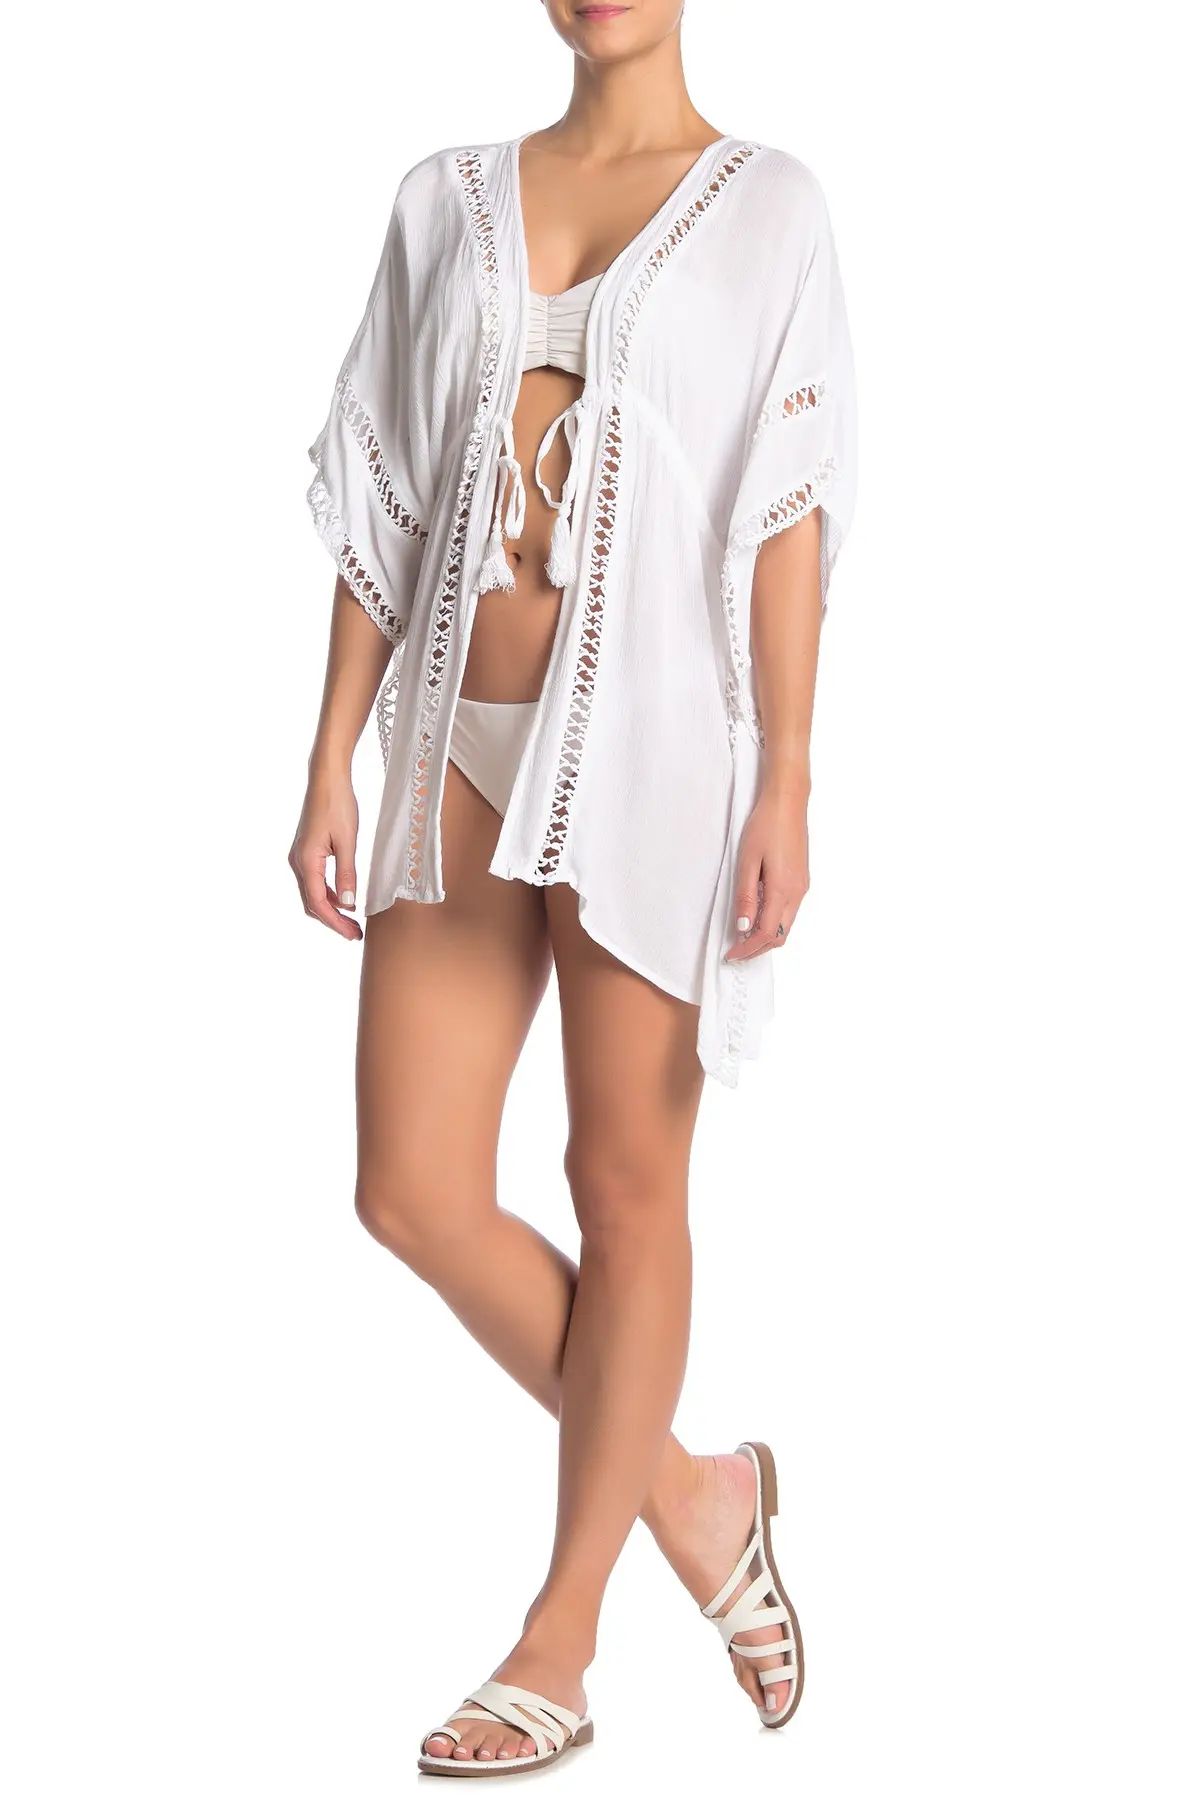 BOHO ME Solid Lace Trim Cover-Up at Nordstrom Rack | Hautelook